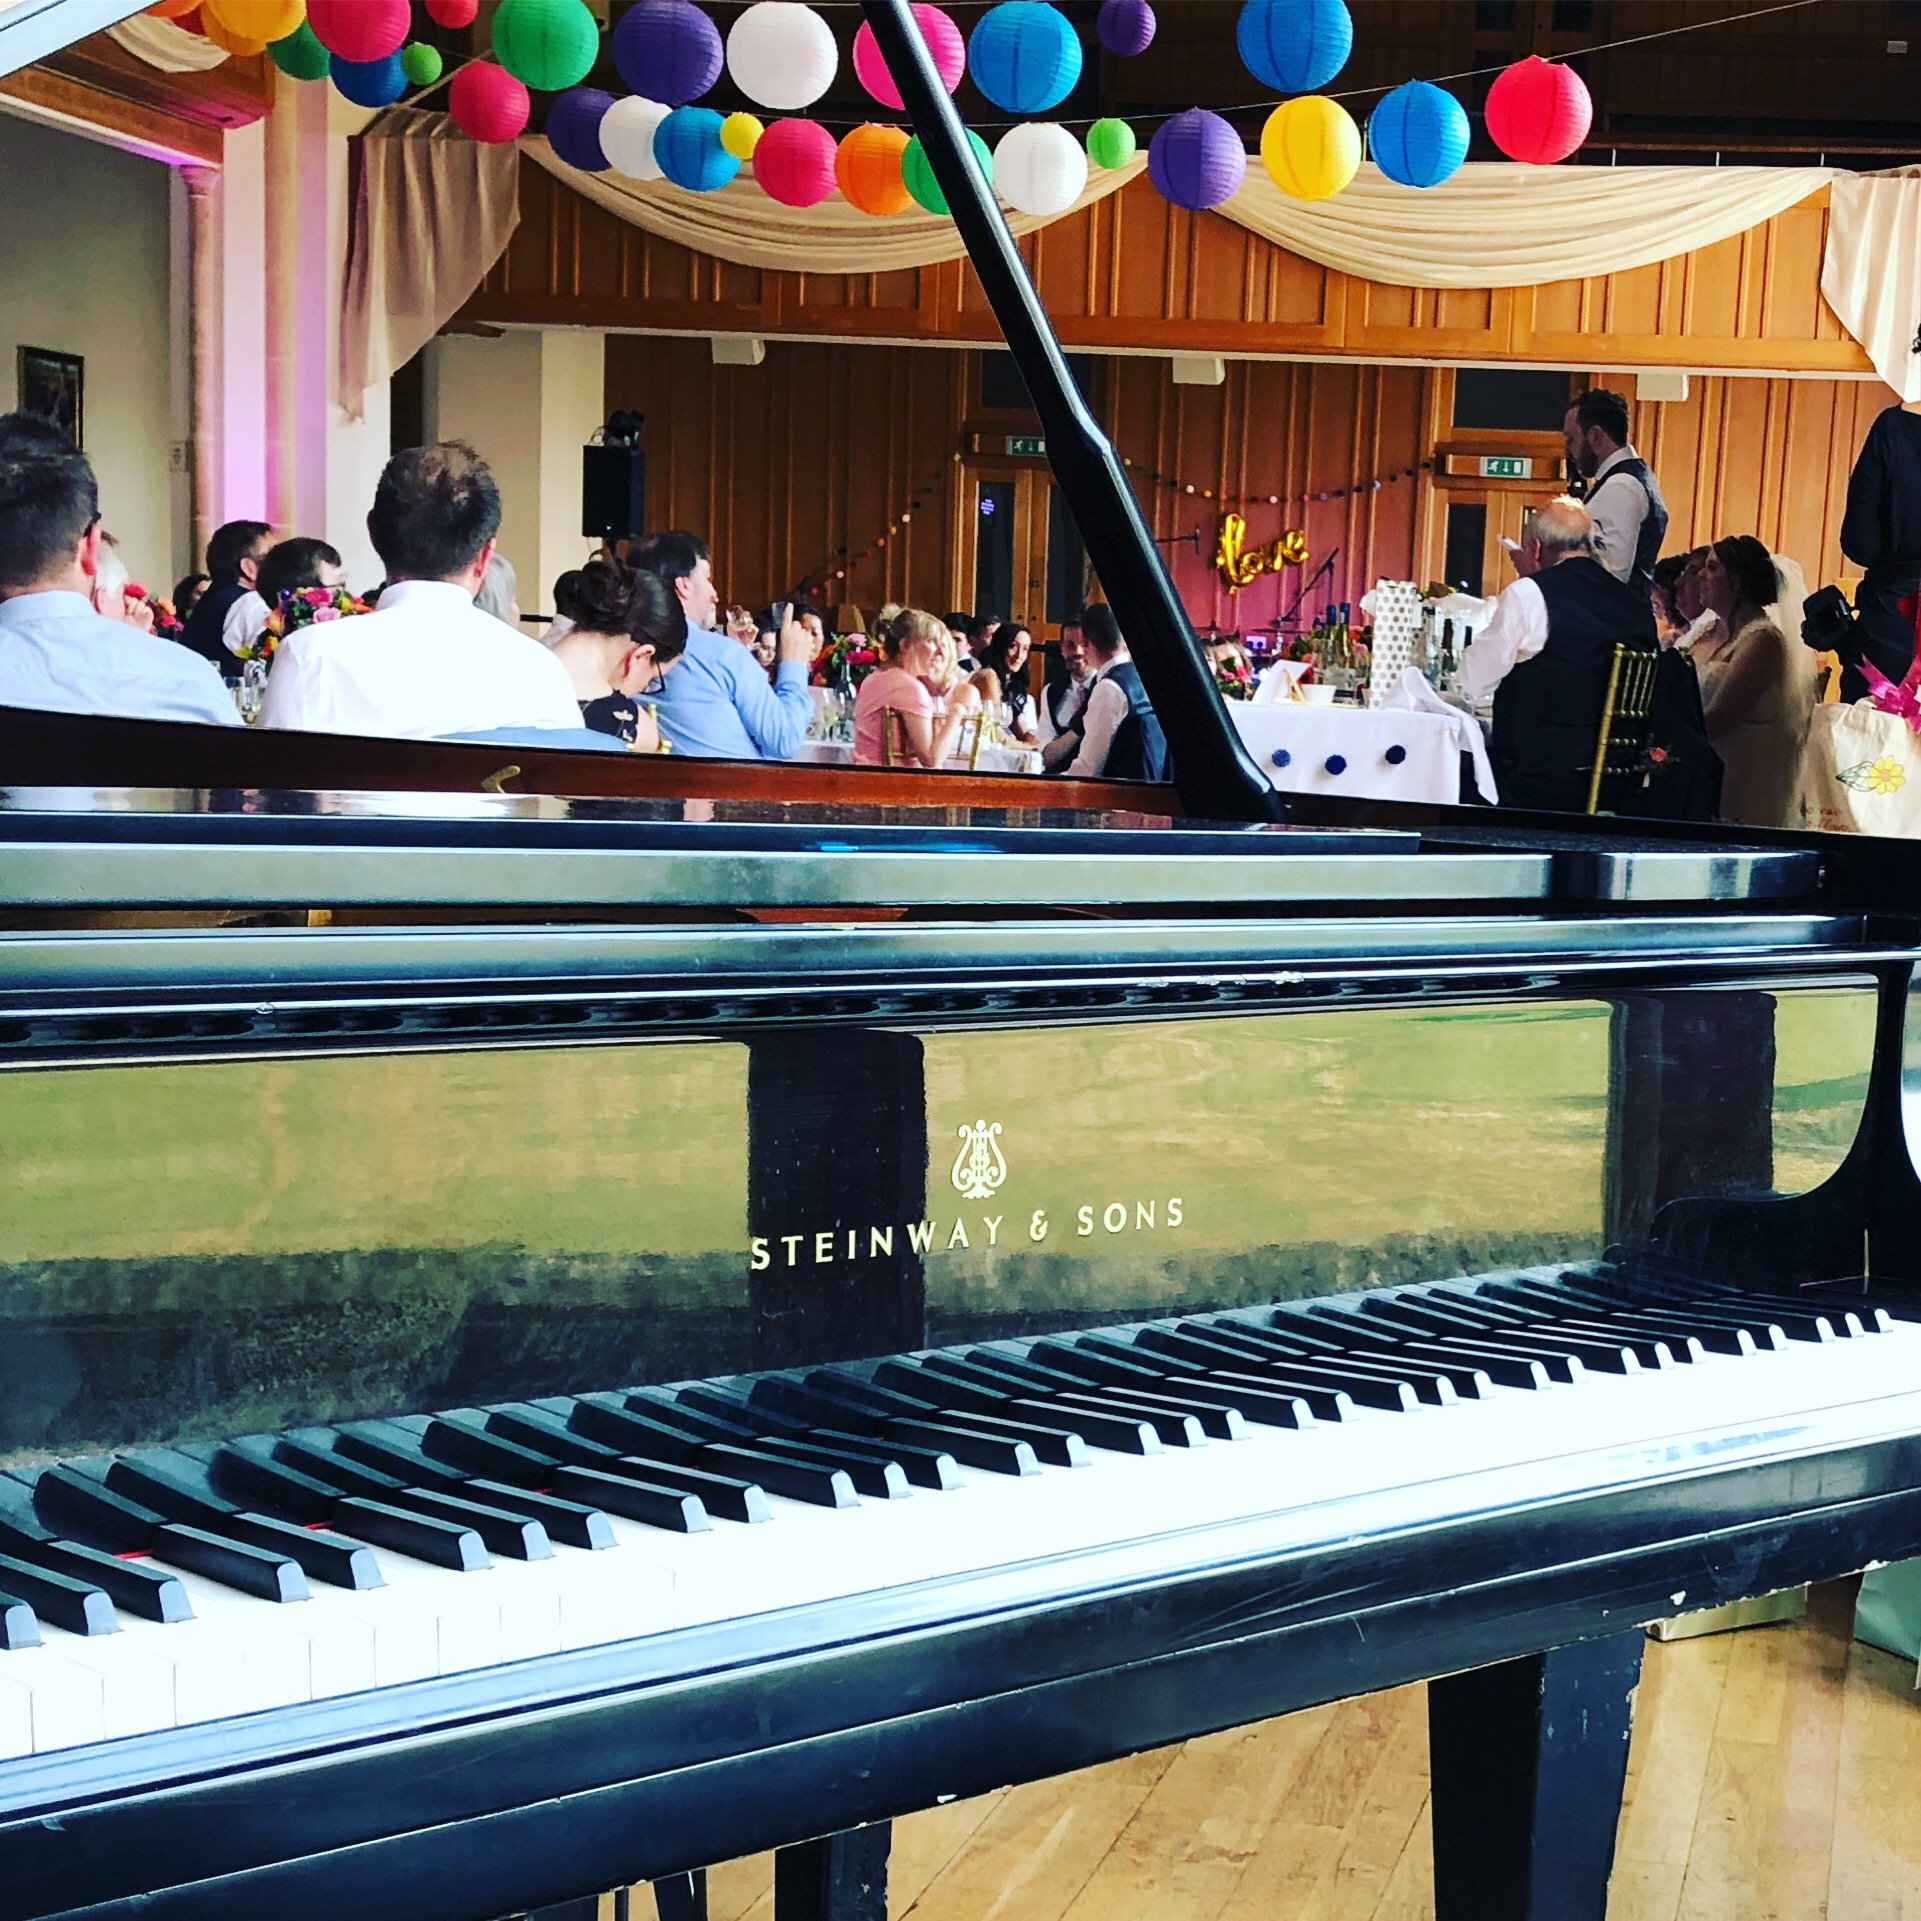 Performing on the 9 foot steinway at Bedford School for a wedding breakfast